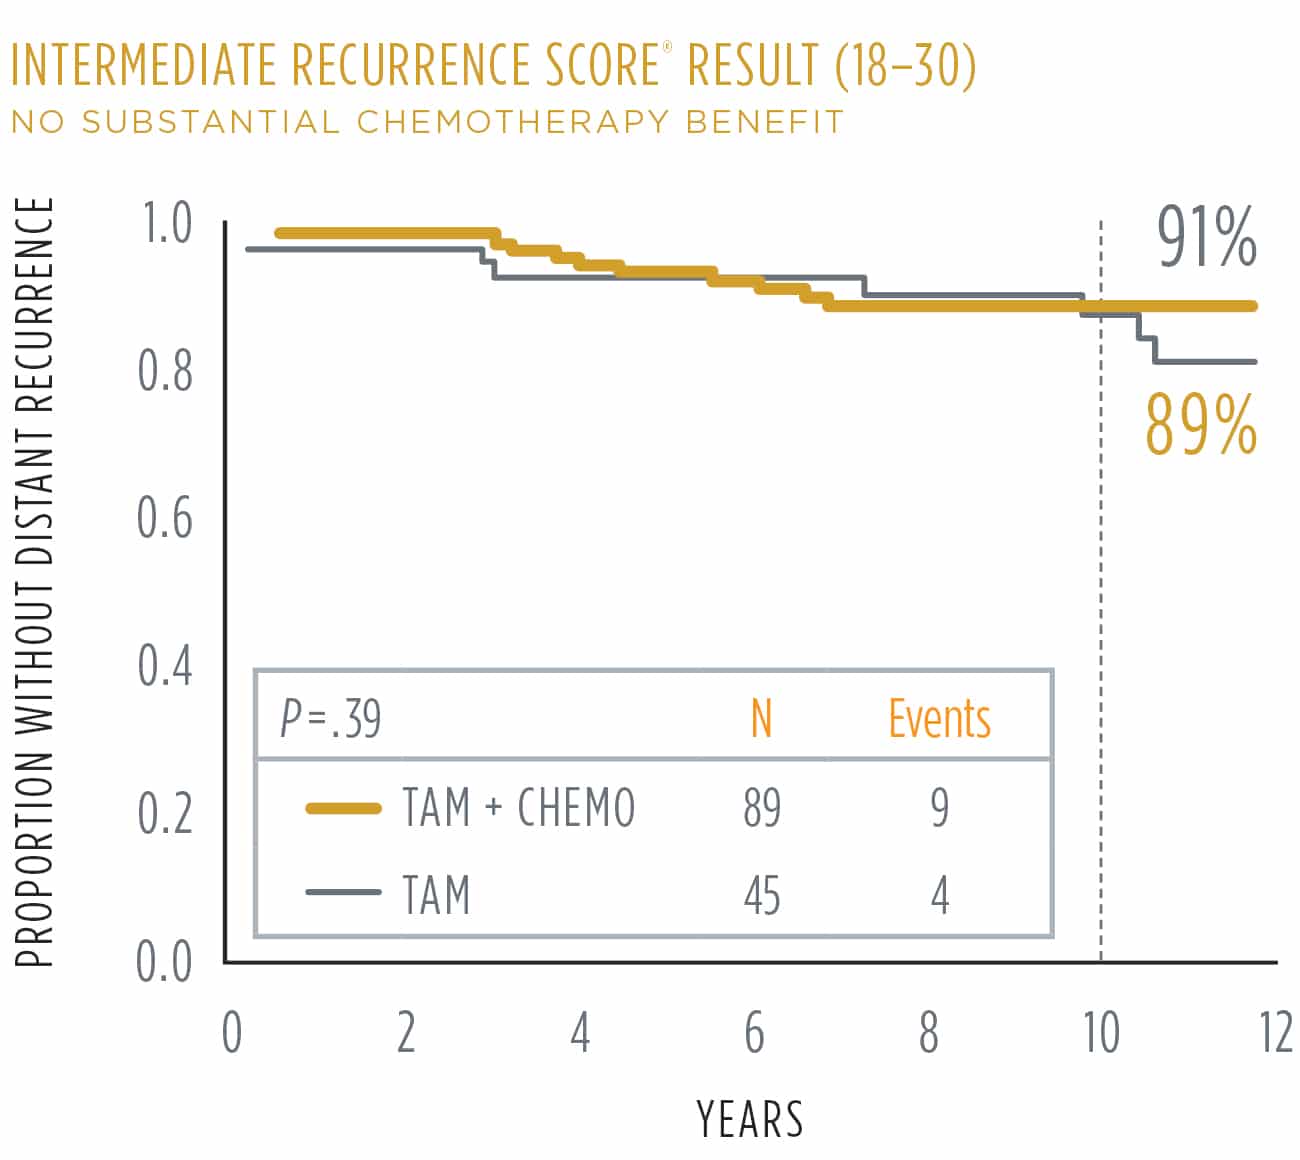 About the Oncoytpe DX Breast Recurrence ScoreÂ®